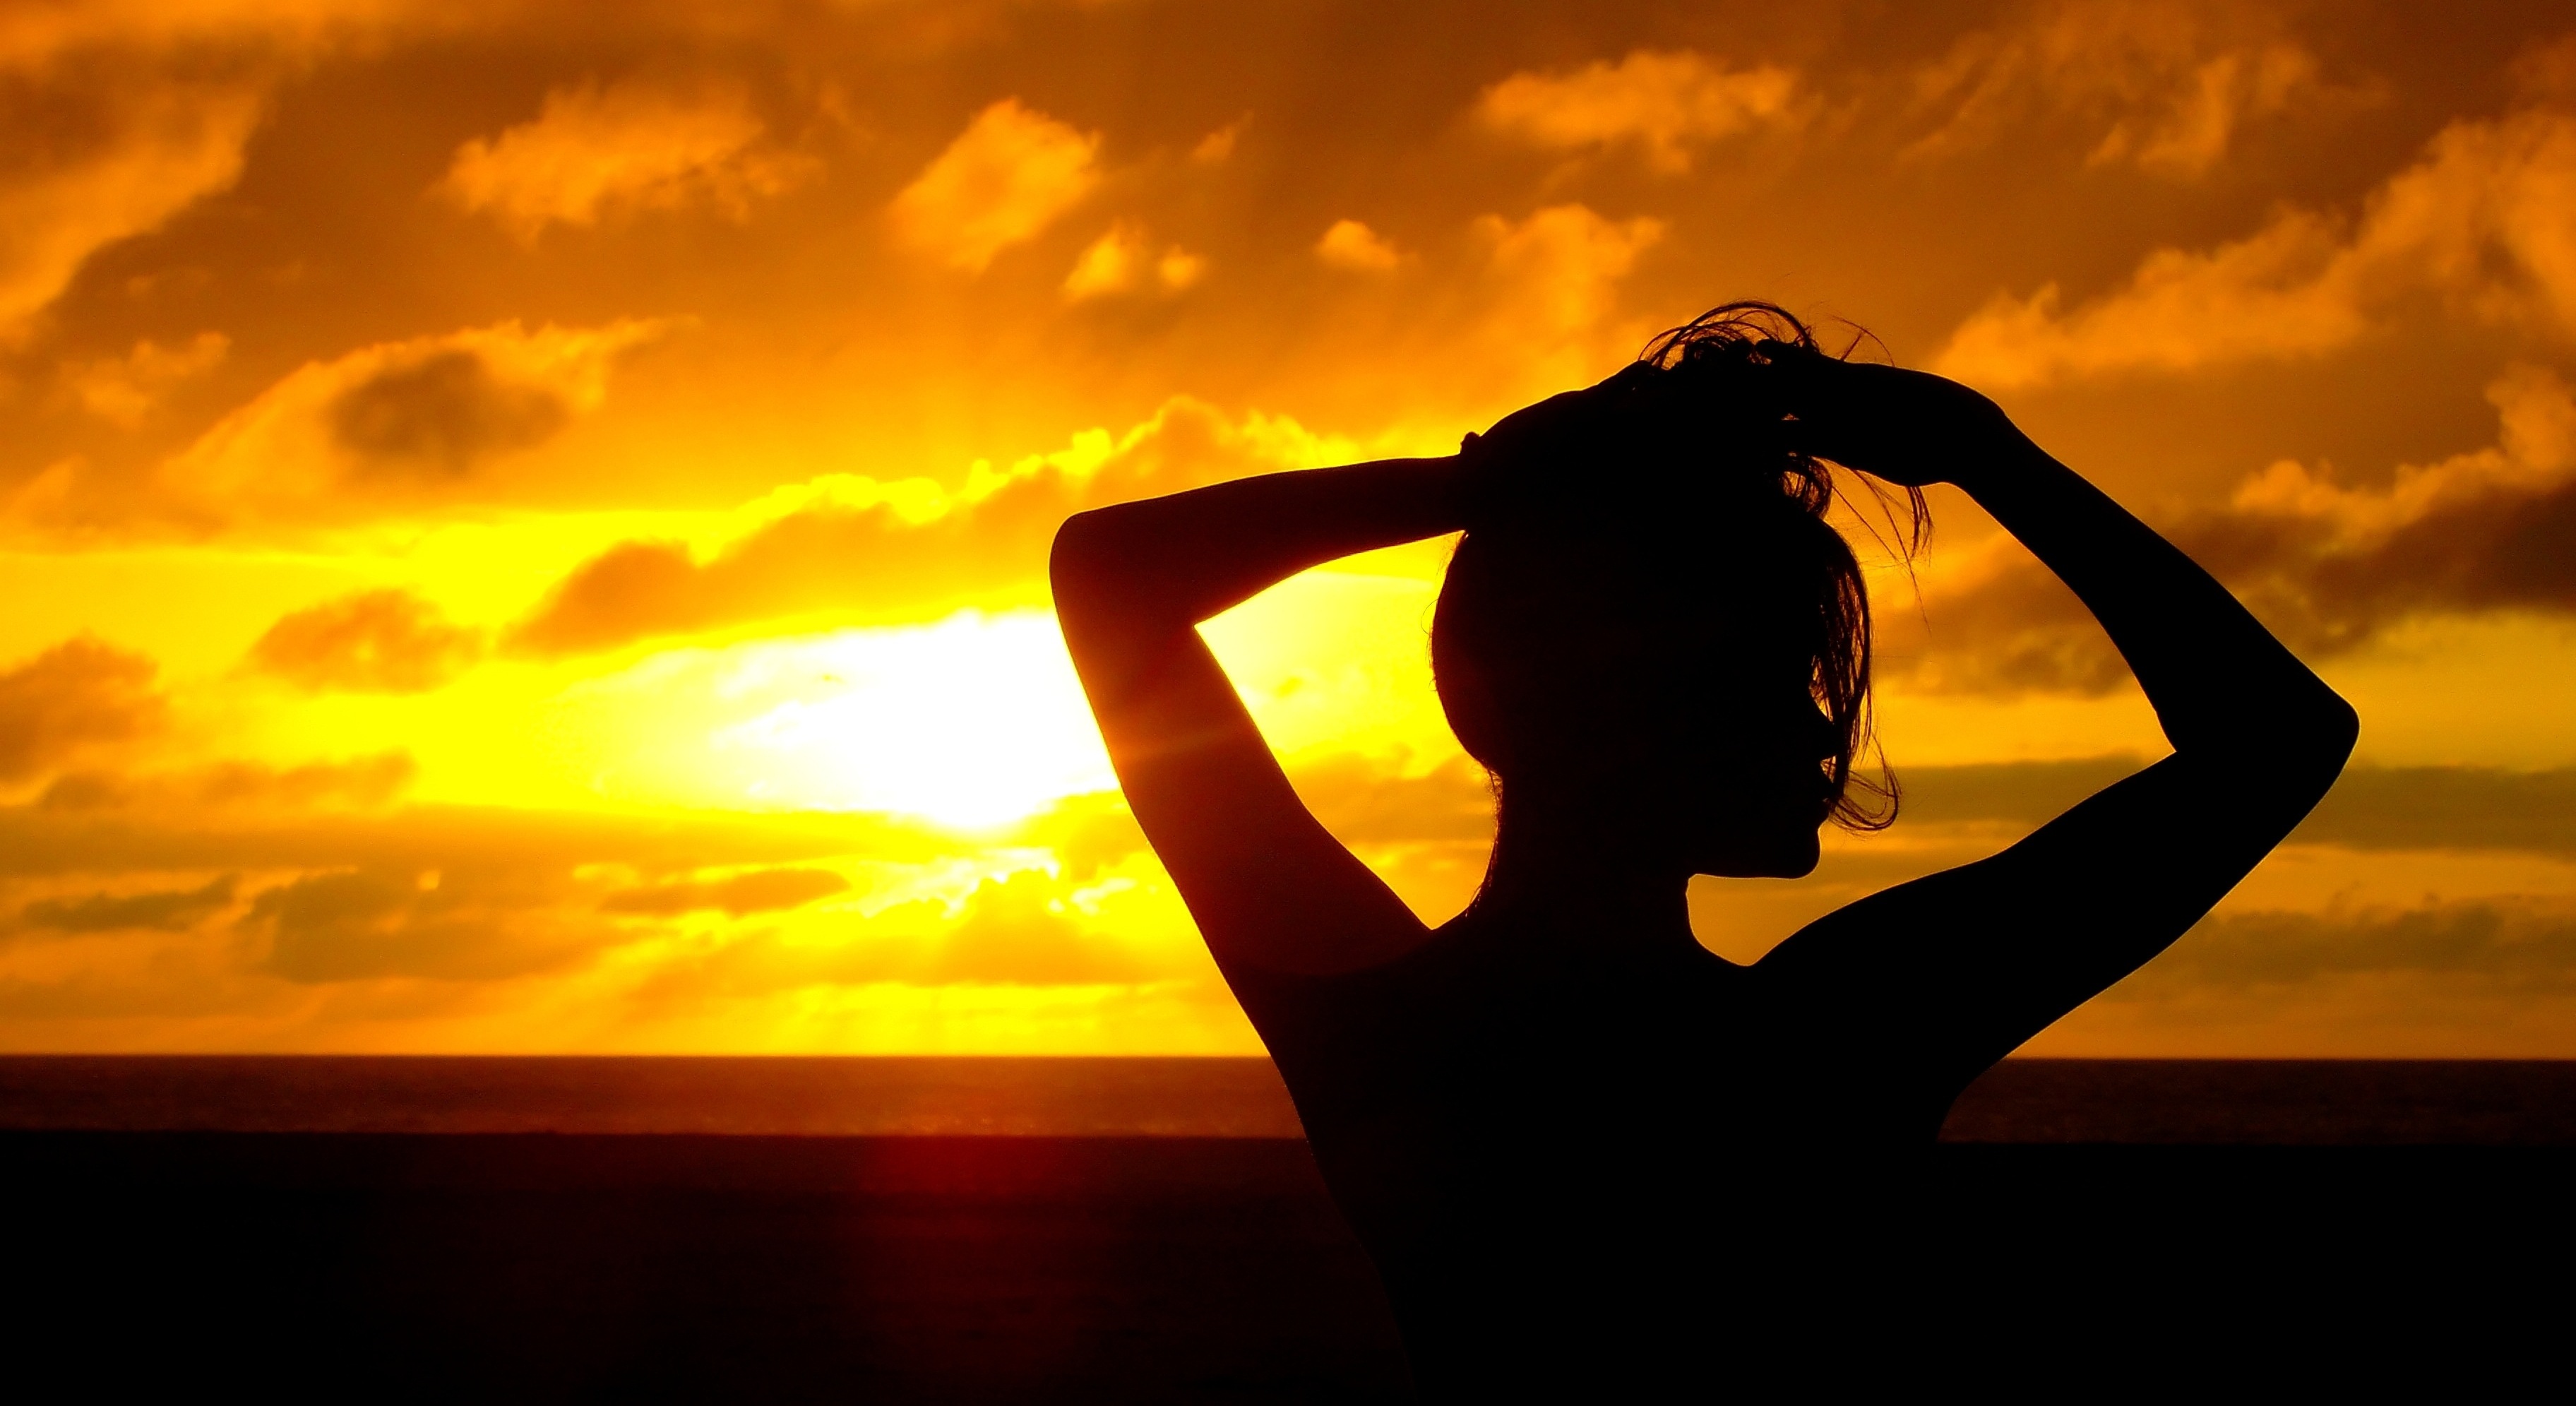 beach girl wallpaper,people in nature,sky,backlighting,physical fitness,silhouette